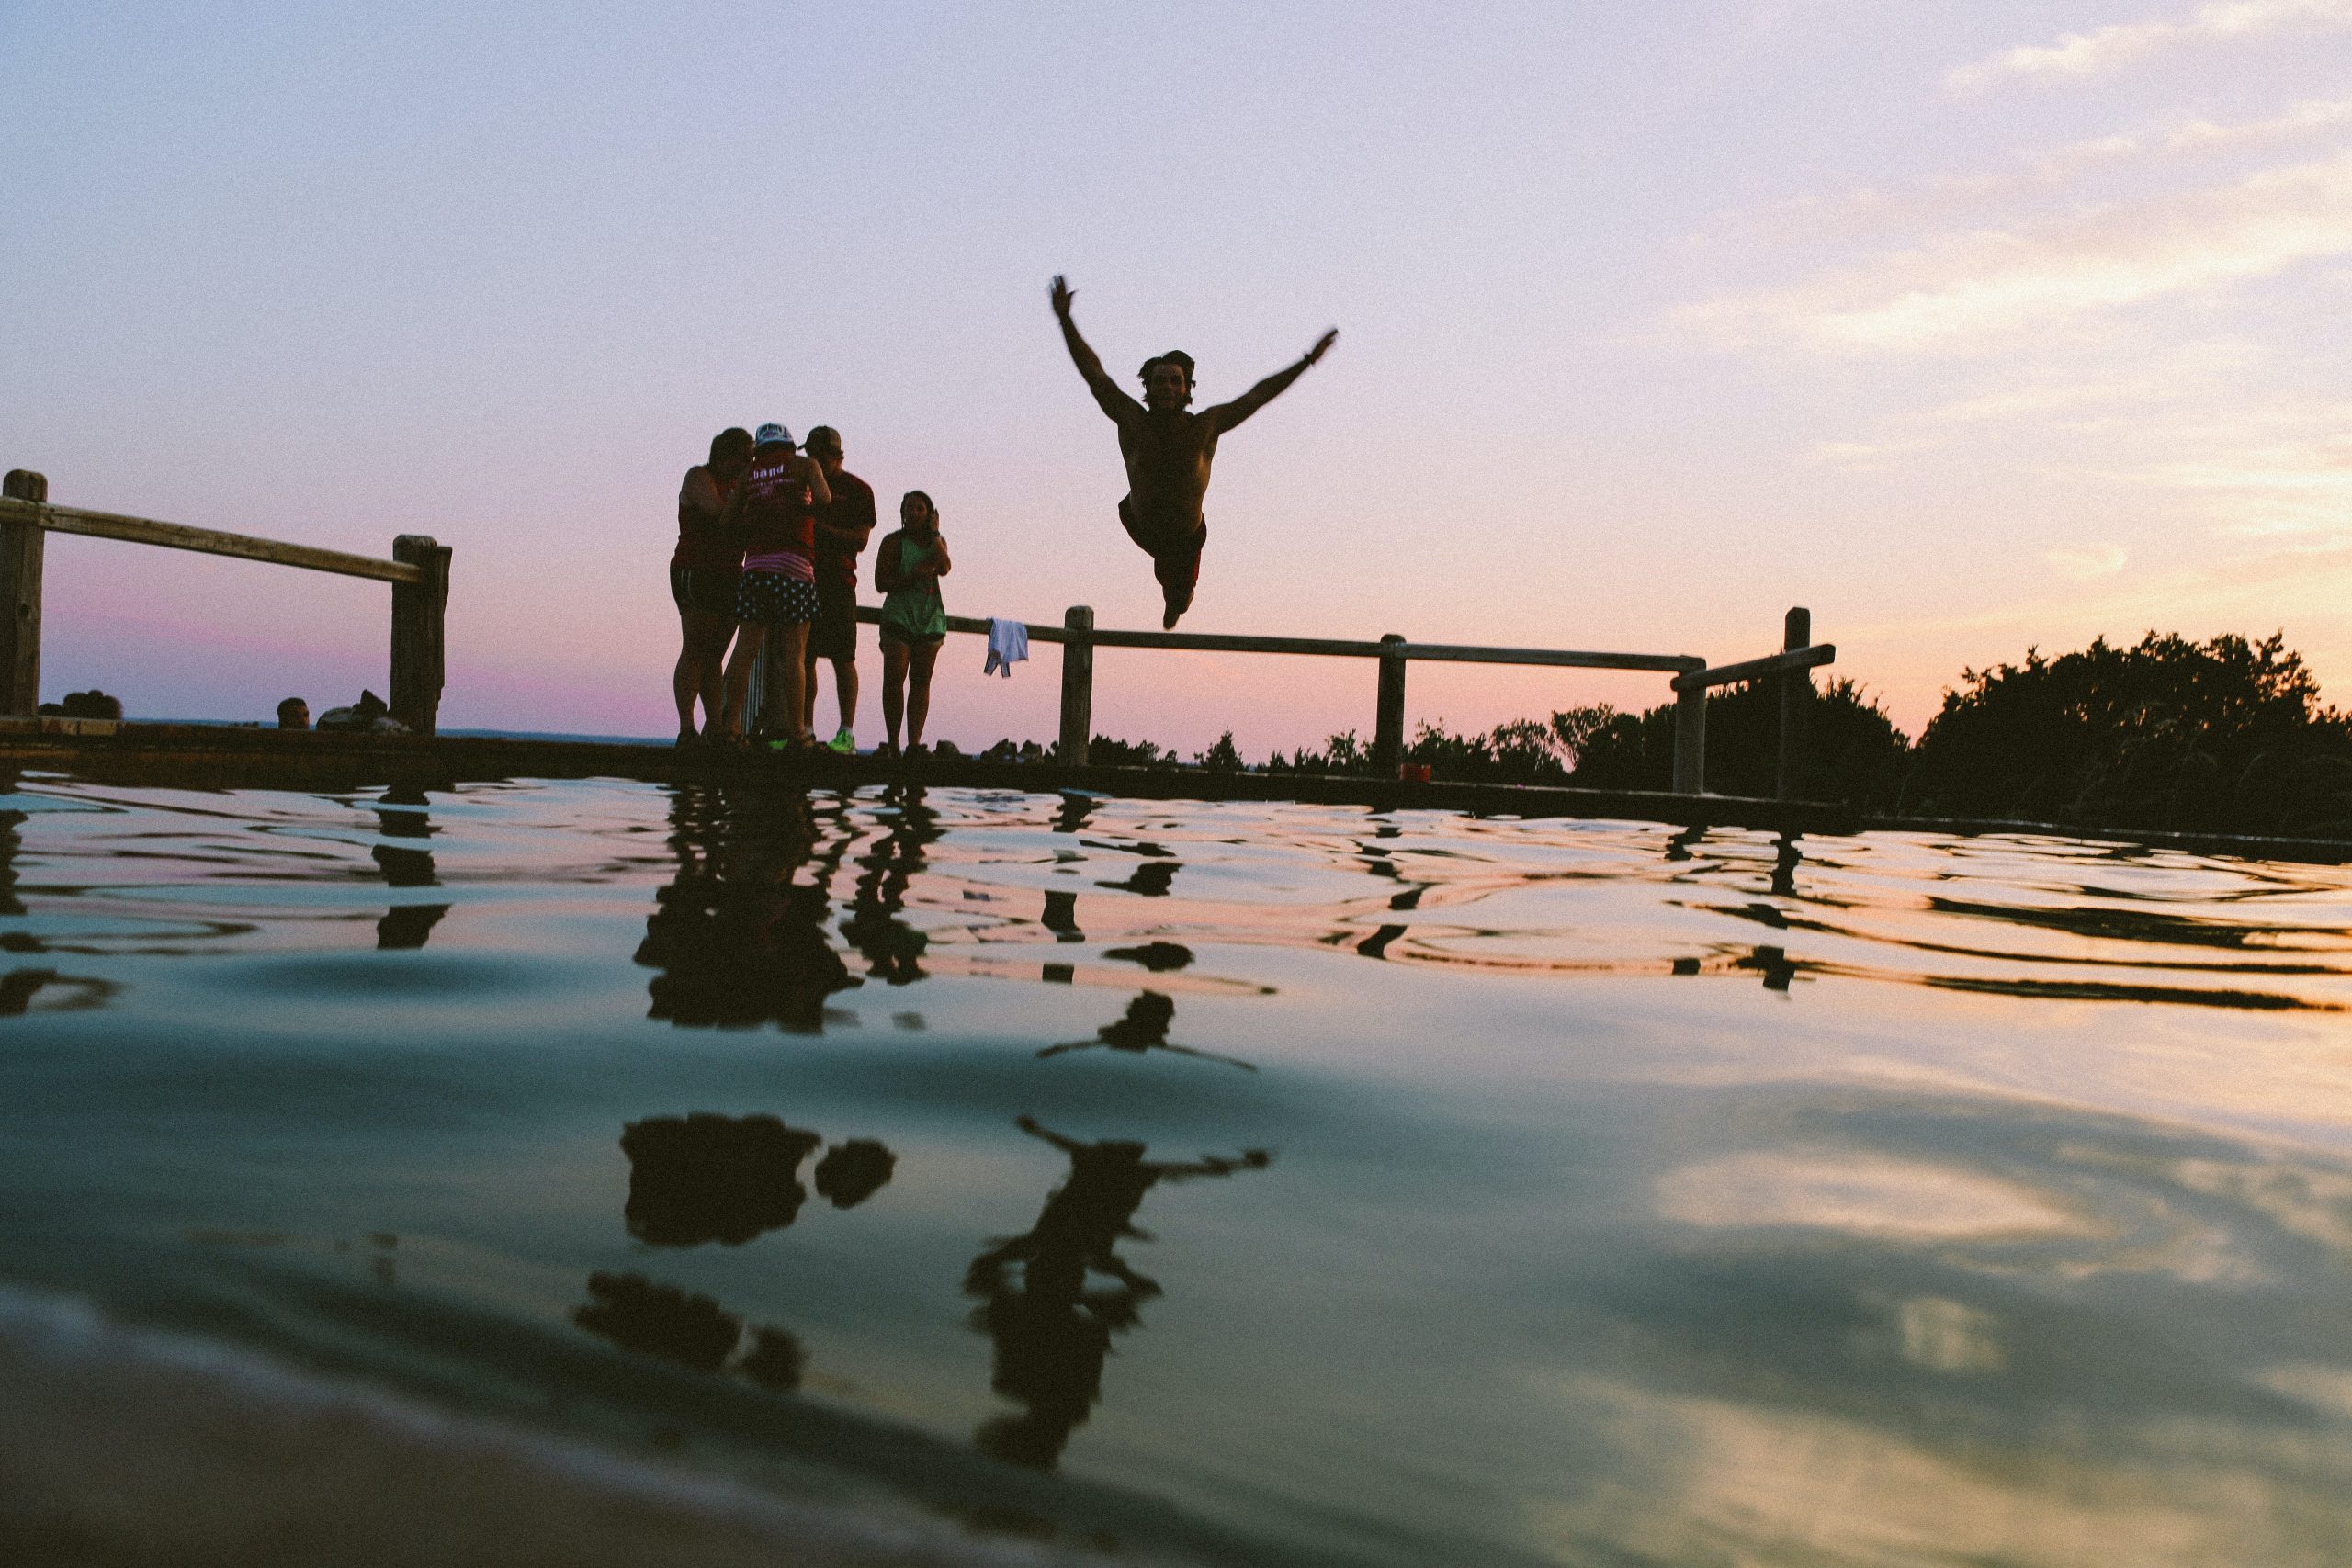 youth standing poolside at sunset with one person jumping in the pool